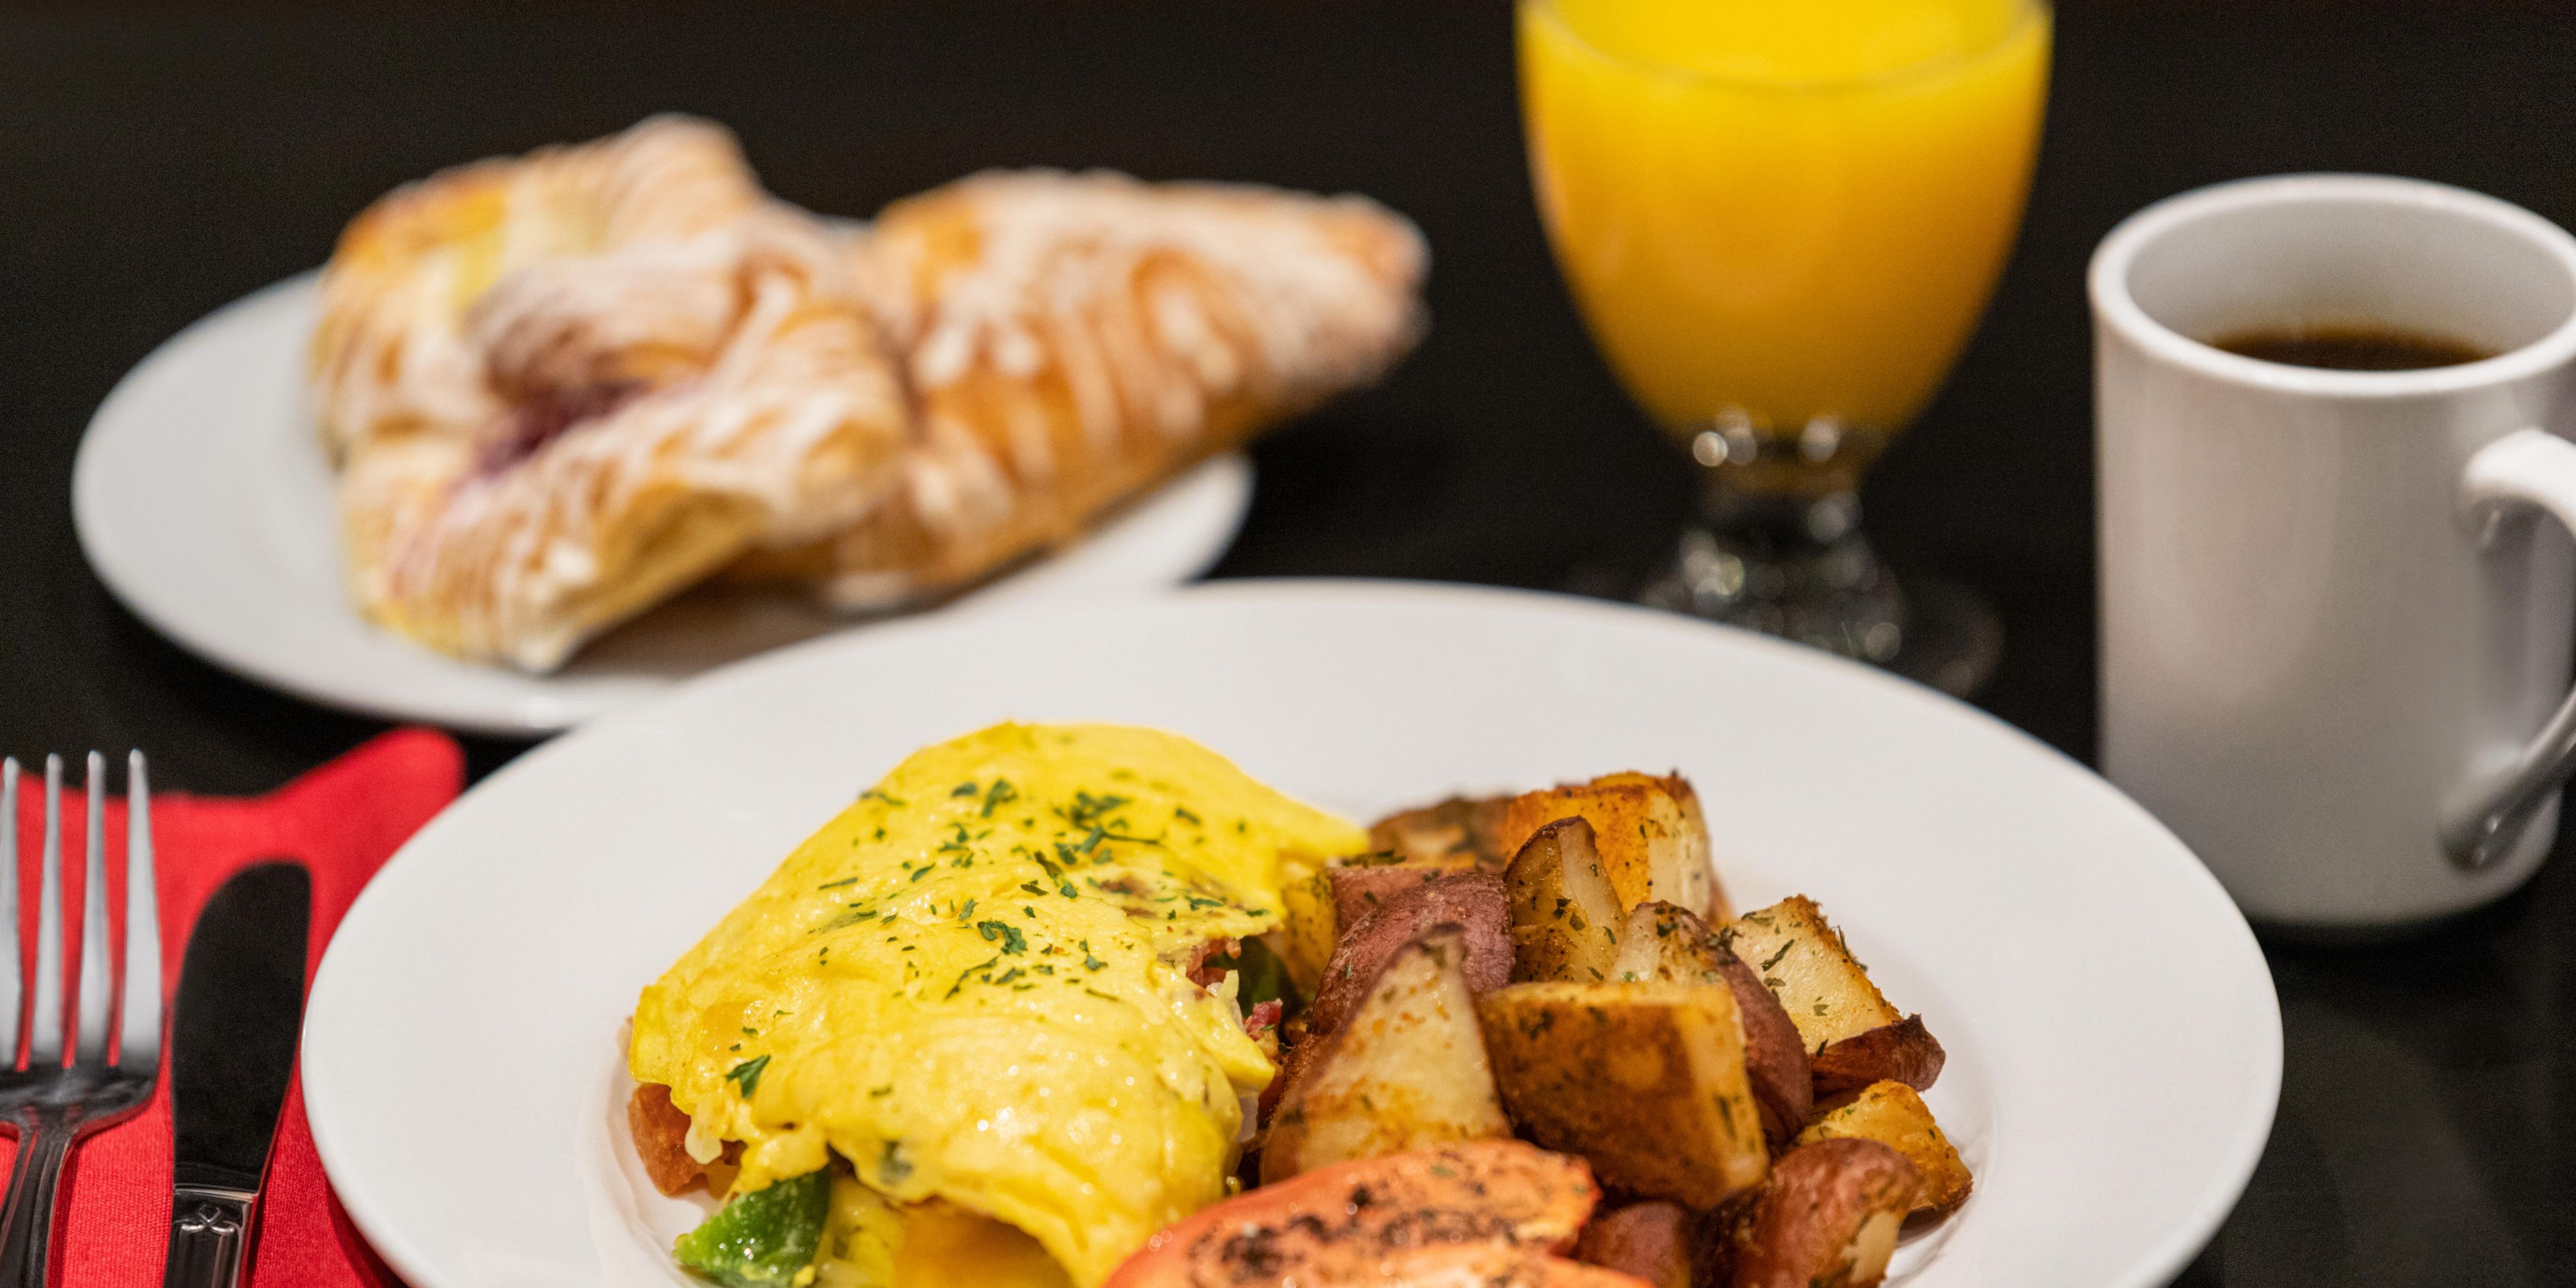 Wake up to freshly brewed coffee and a hot breakfast.